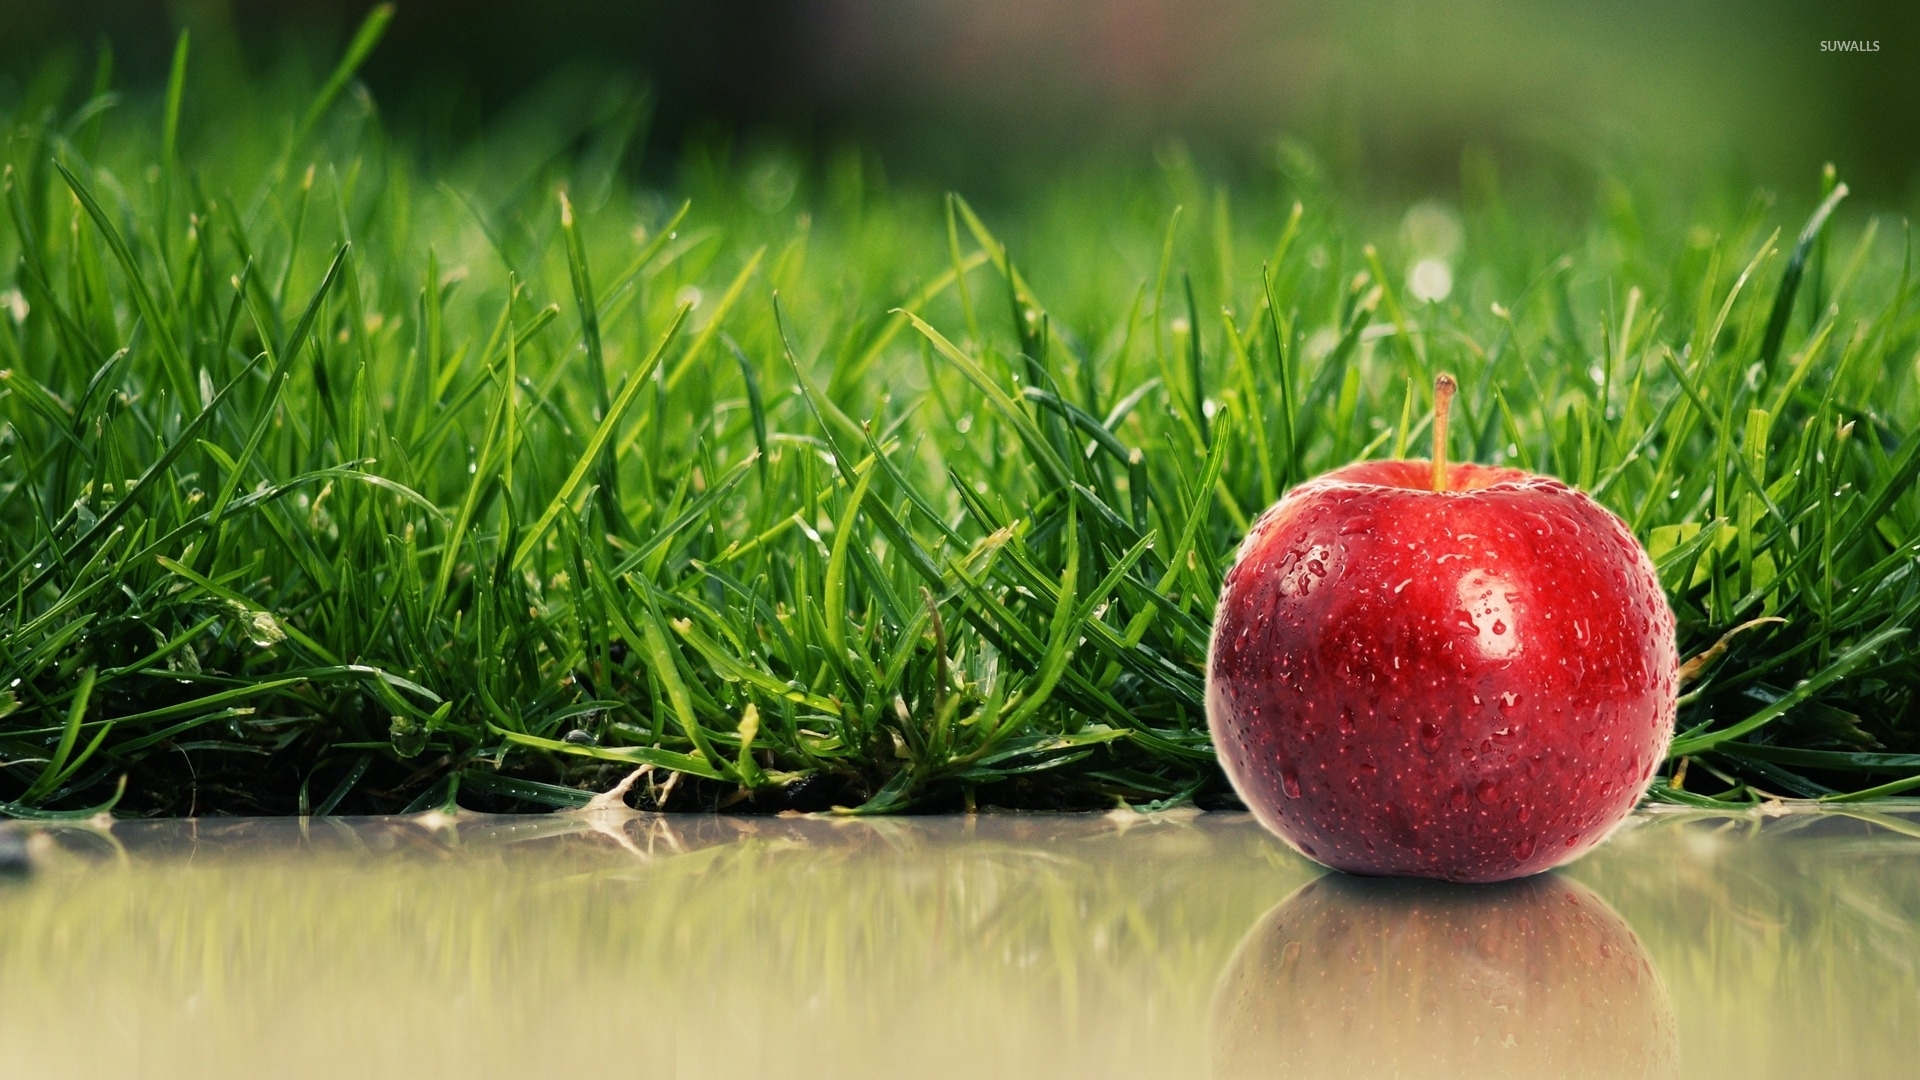 Red Apple With Water Drops By The Green Grass Wallpaper